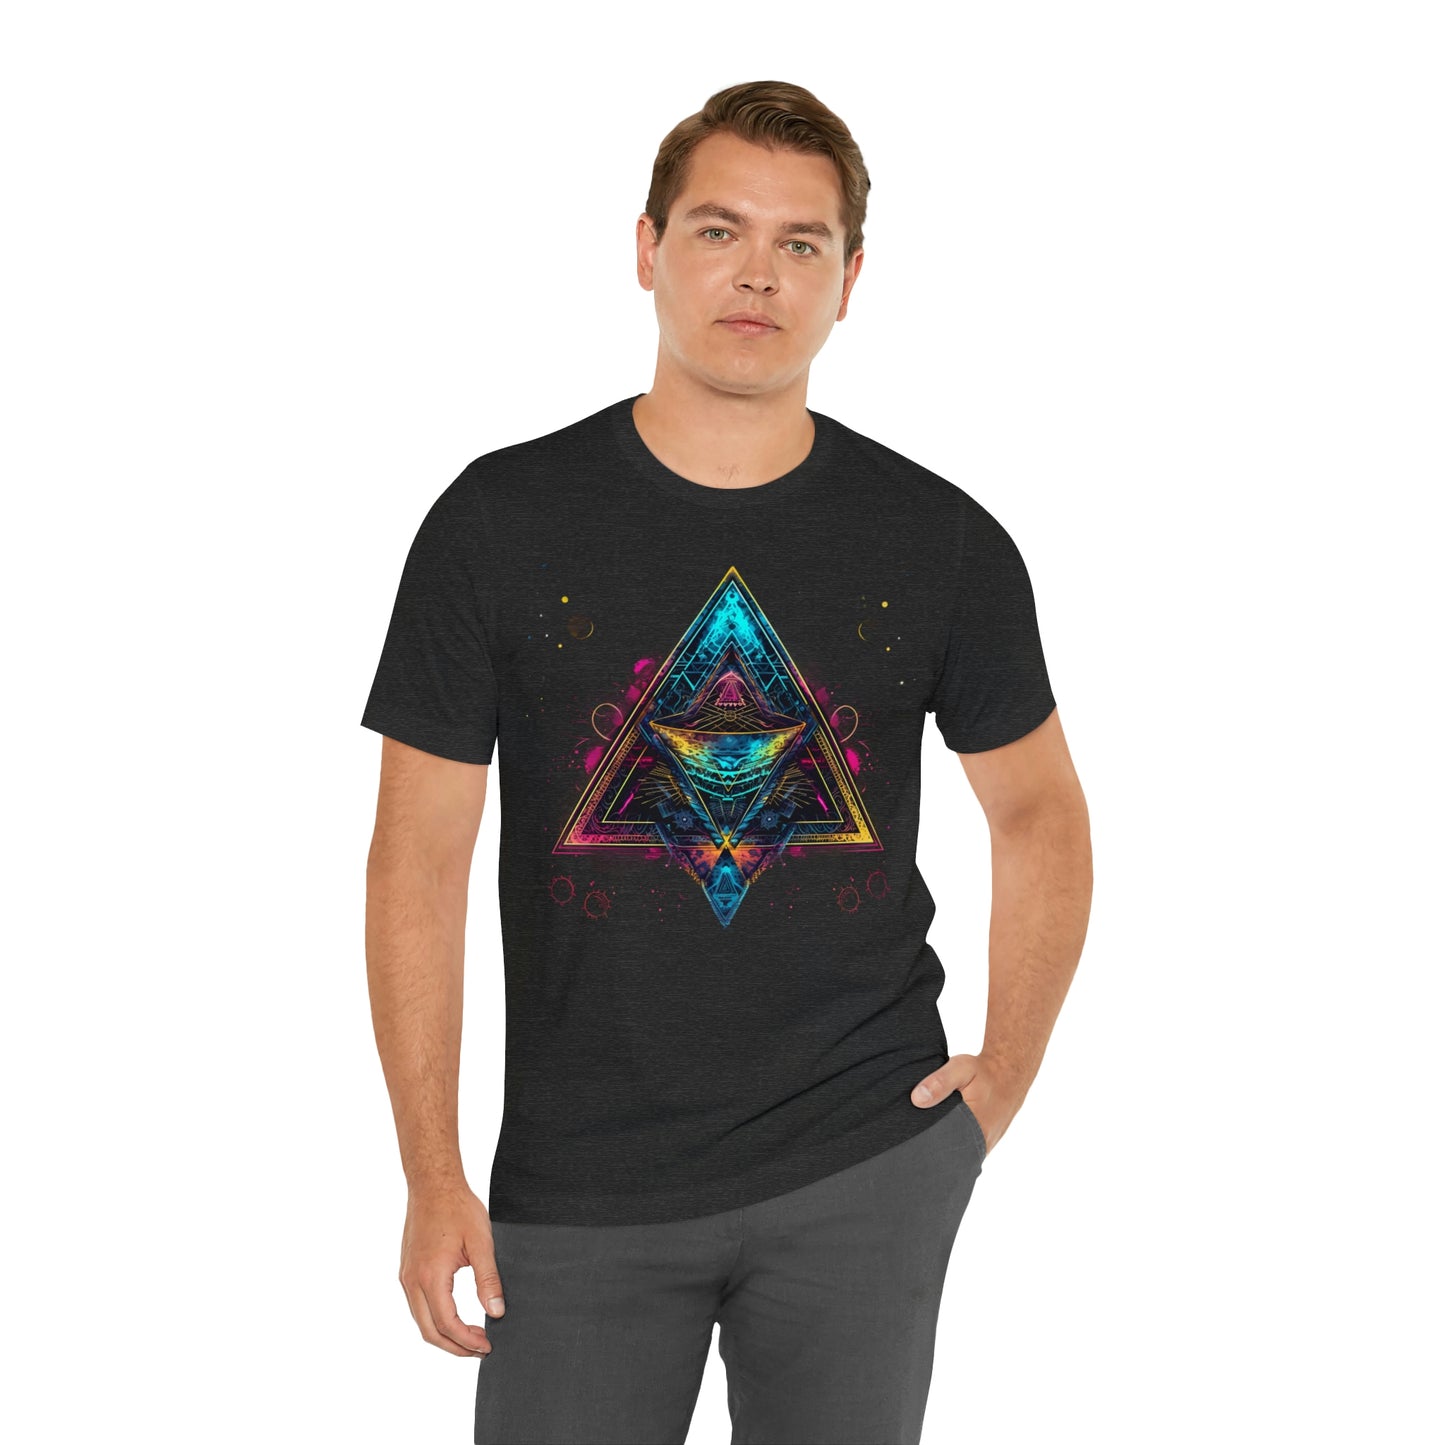 Spiritual Geometry Ancient Alien Spaceship T-Shirt: Embrace the Cosmos & Unite in Higher Consciousness